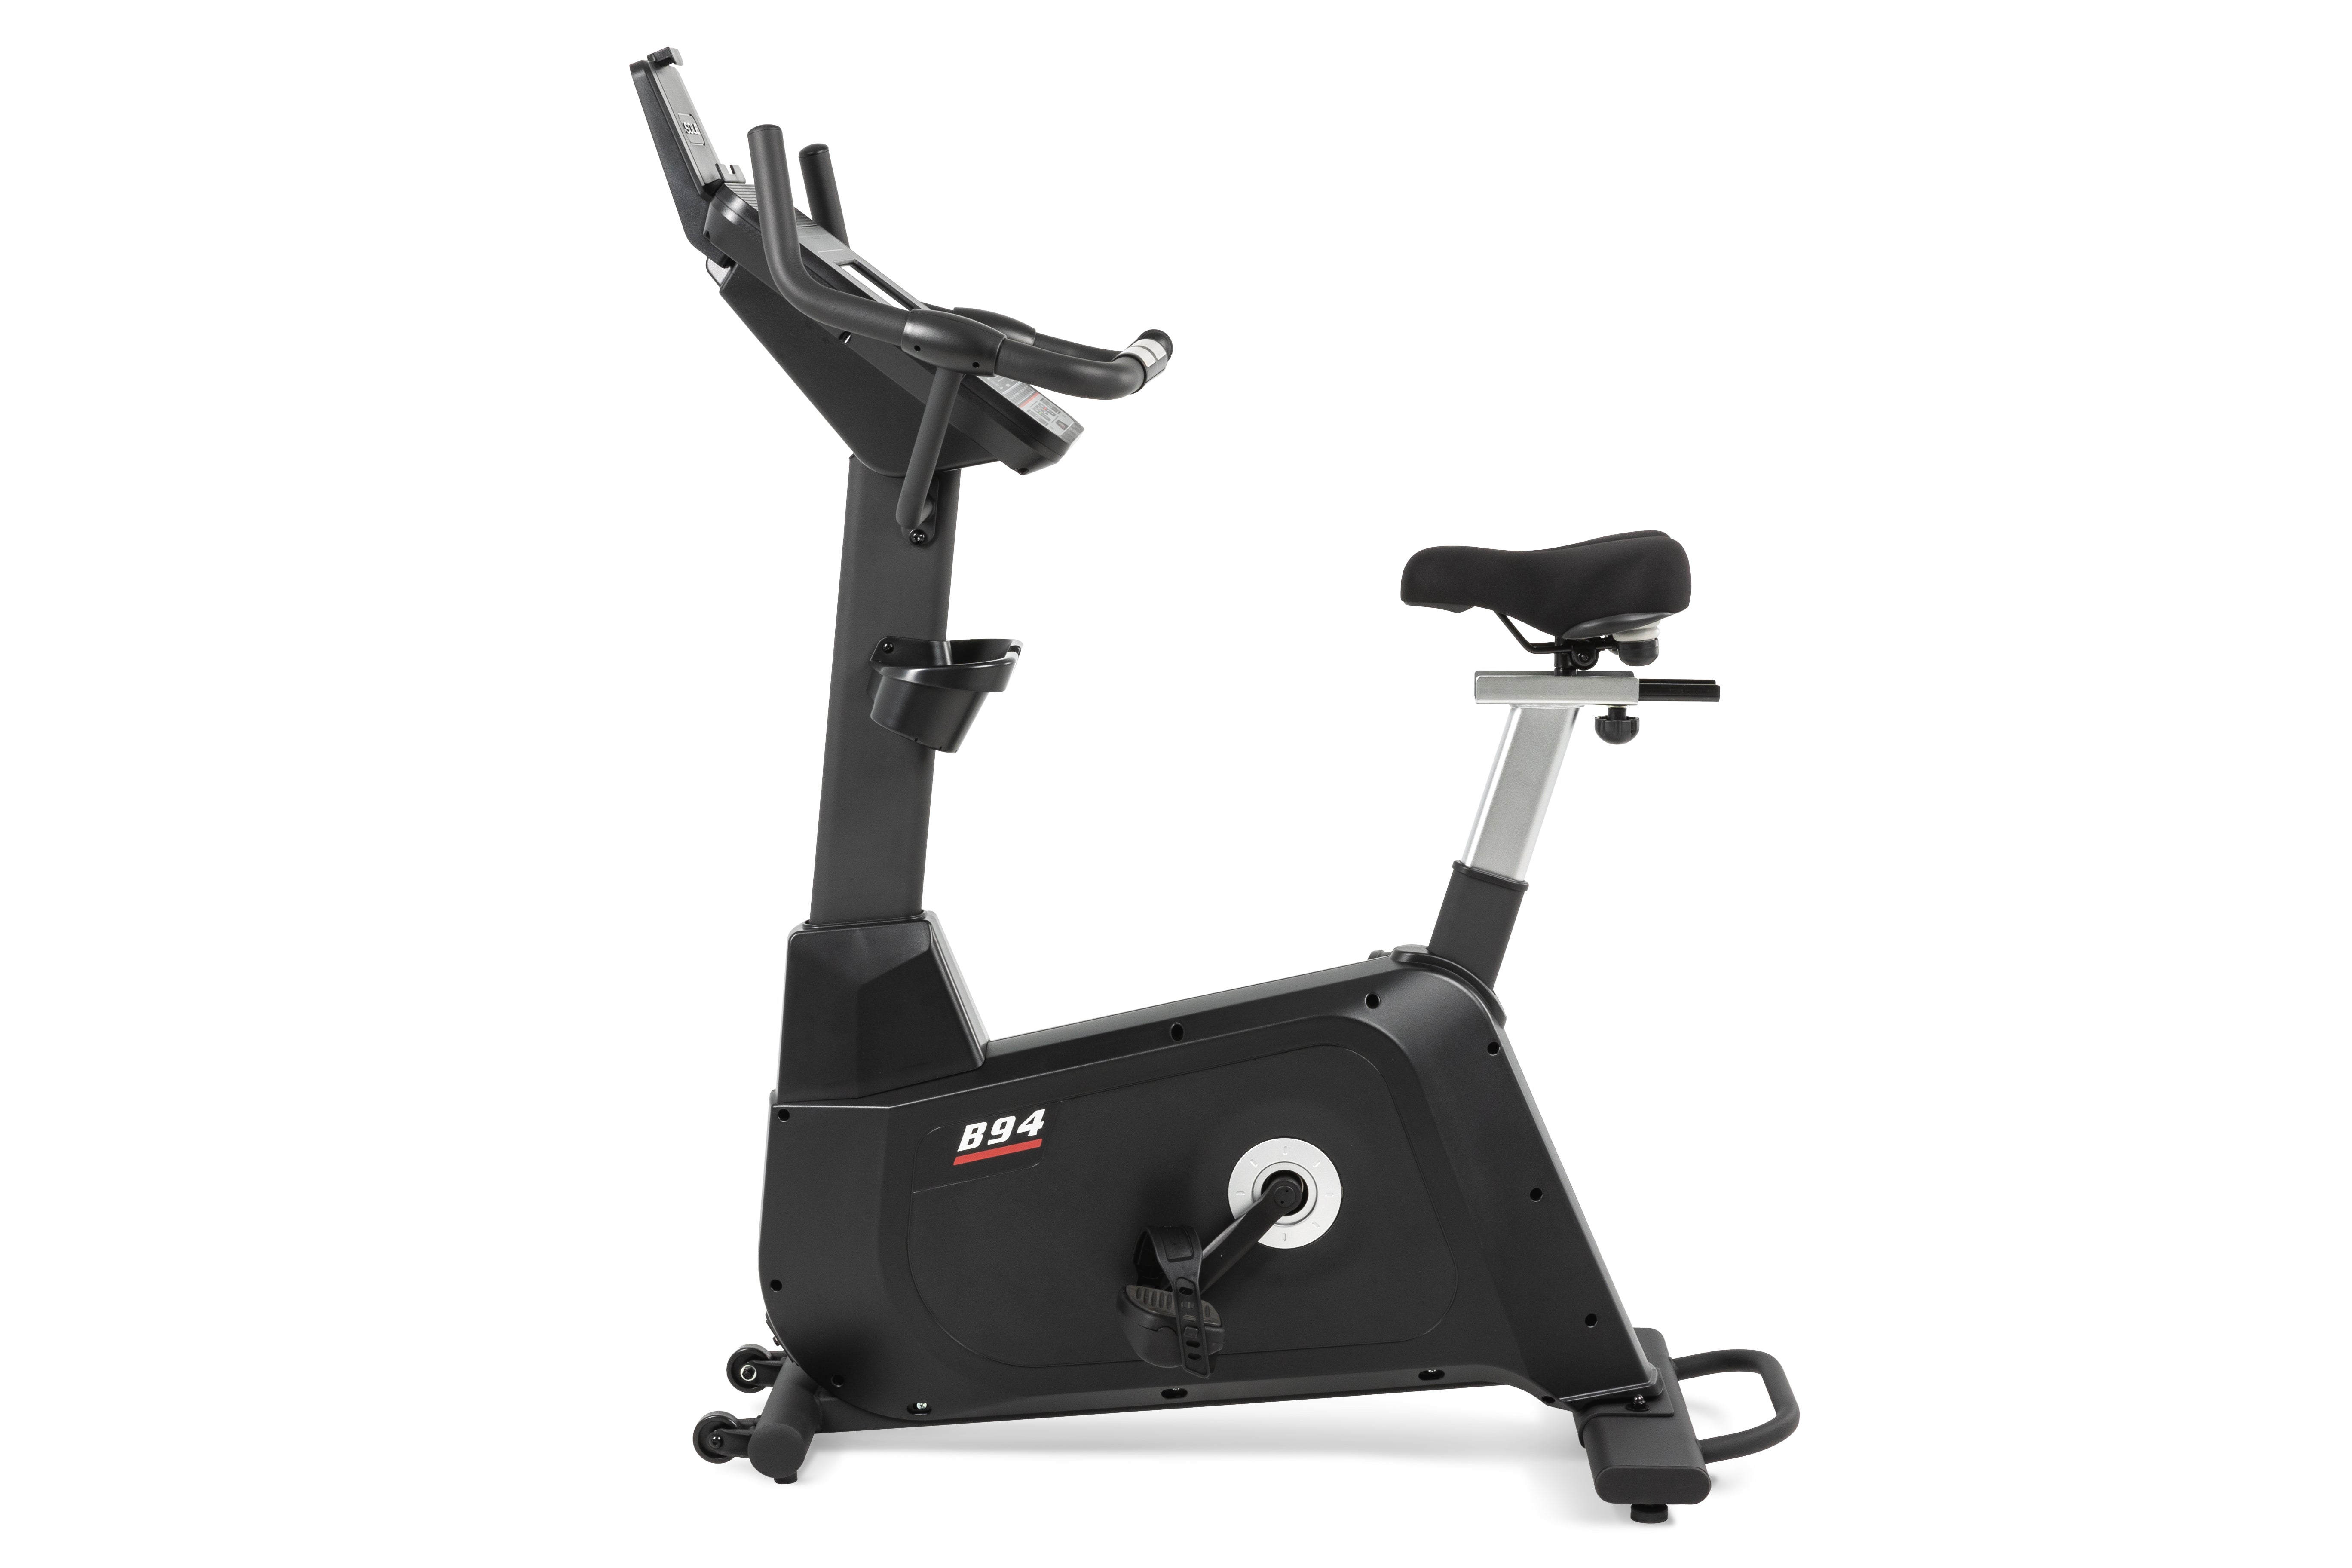 Sole B94 exercise bike with a modern design, showcasing a digital display panel, ergonomic handlebars, adjustable cushioned seat, and a sturdy base with rolling wheels.